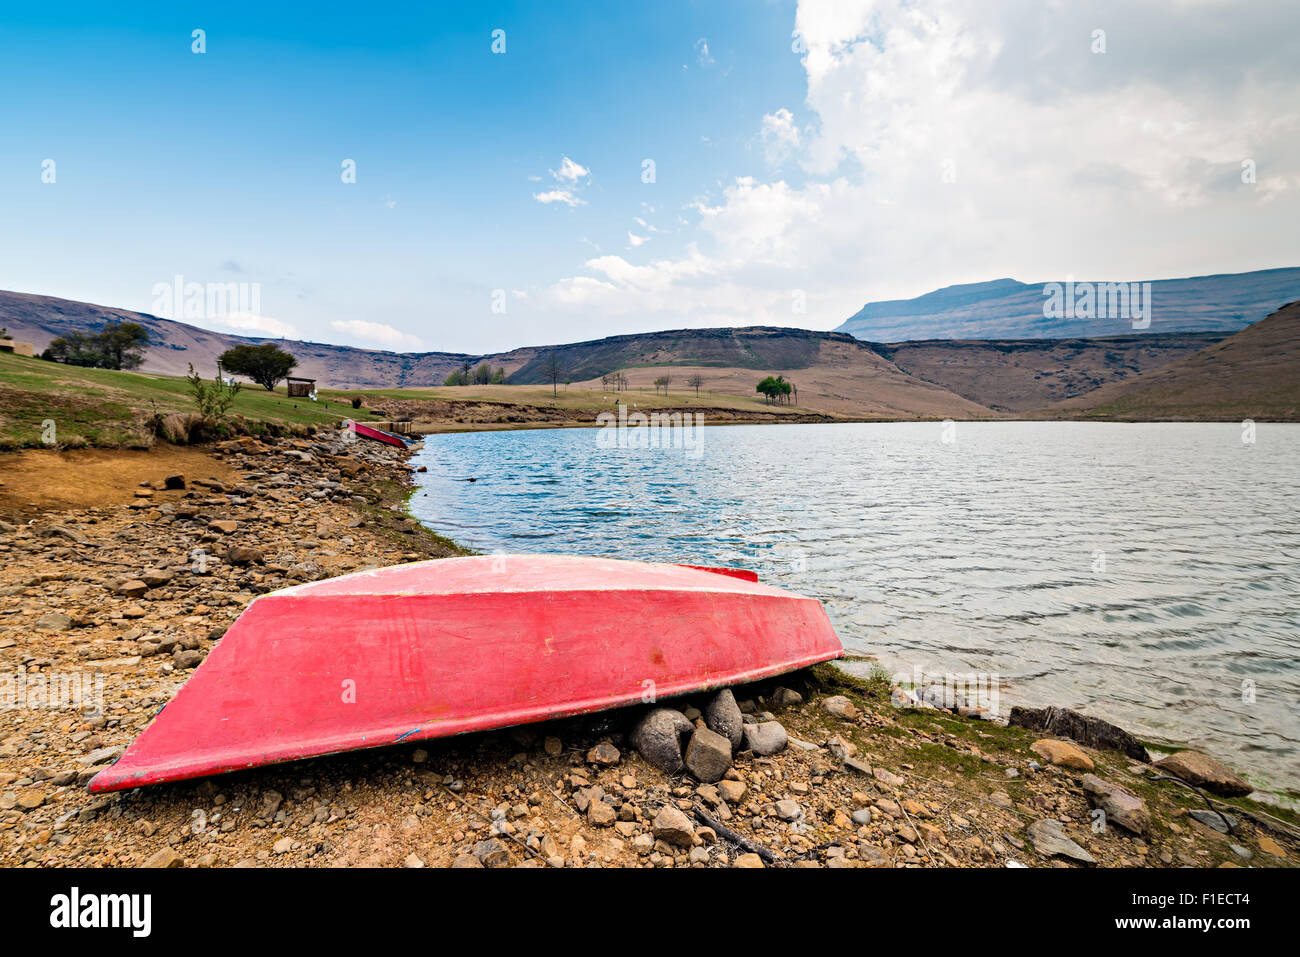 Red boat on lake shore with the Drakensberg mountains in the distance Stock Photo